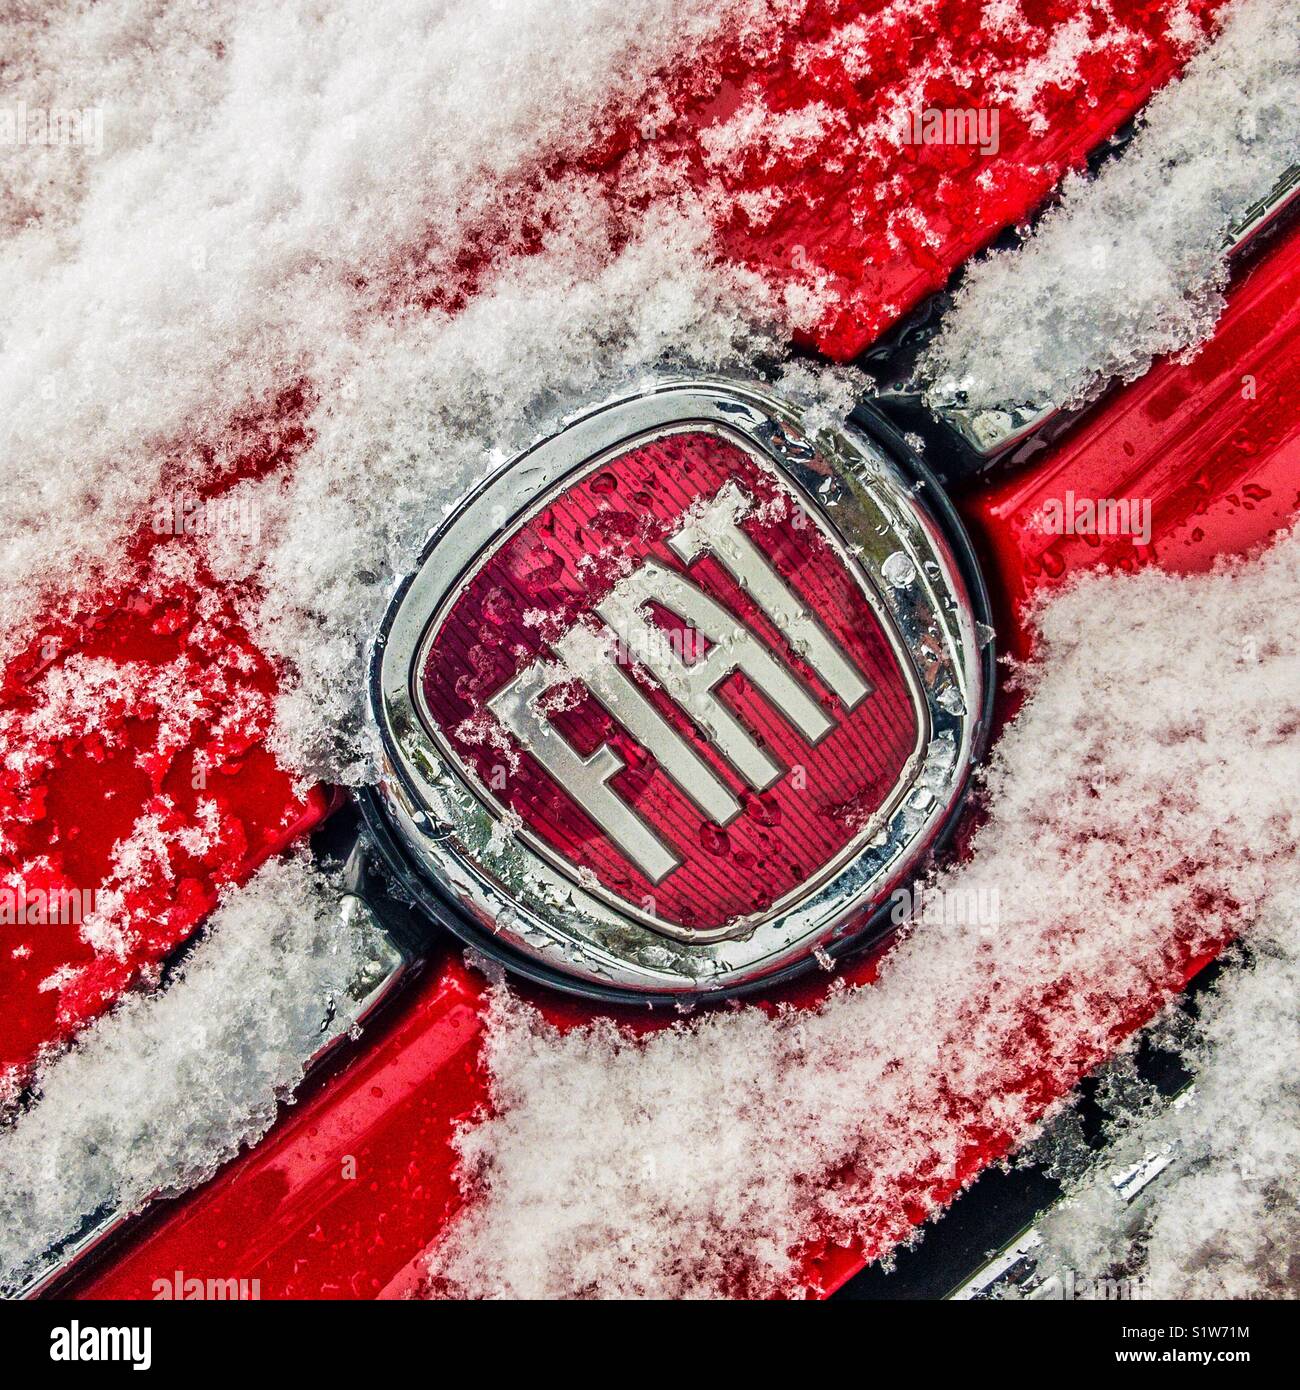 Fiat badge on red fiat 500 car with snow Stock Photo - Alamy